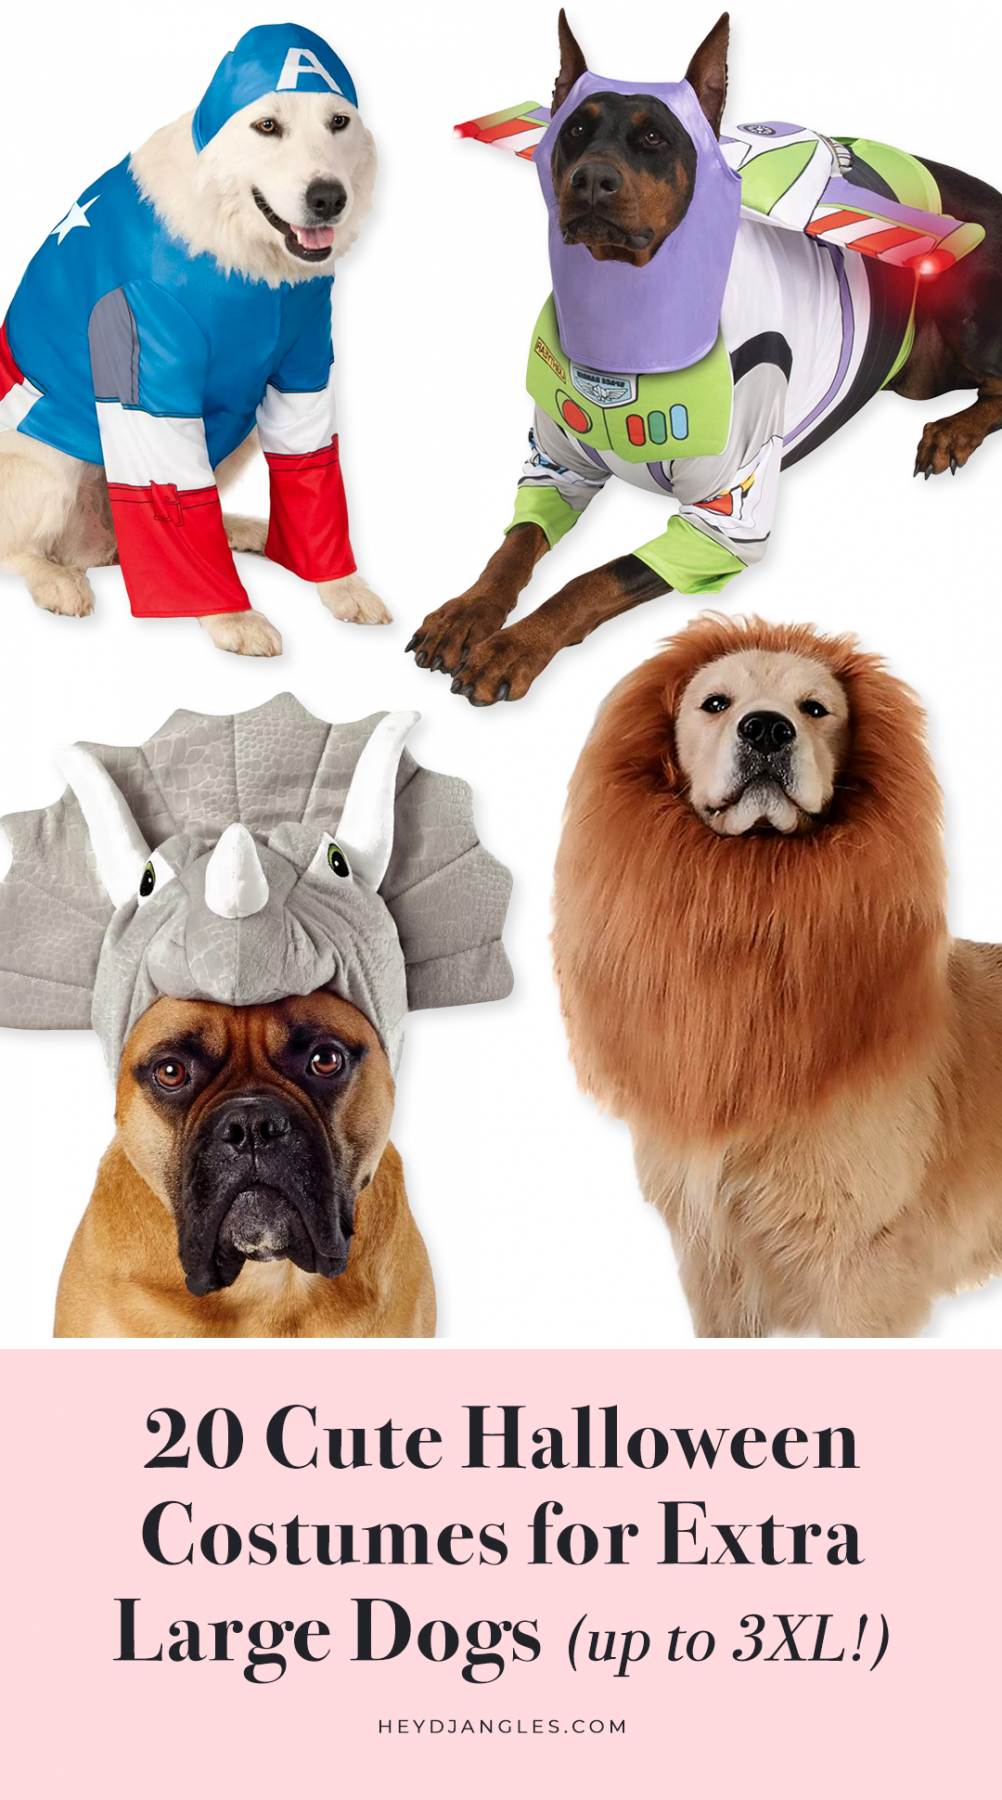 20+ Cute Halloween Costumes for Extra Large Dogs (up to 3XL!)  Hey